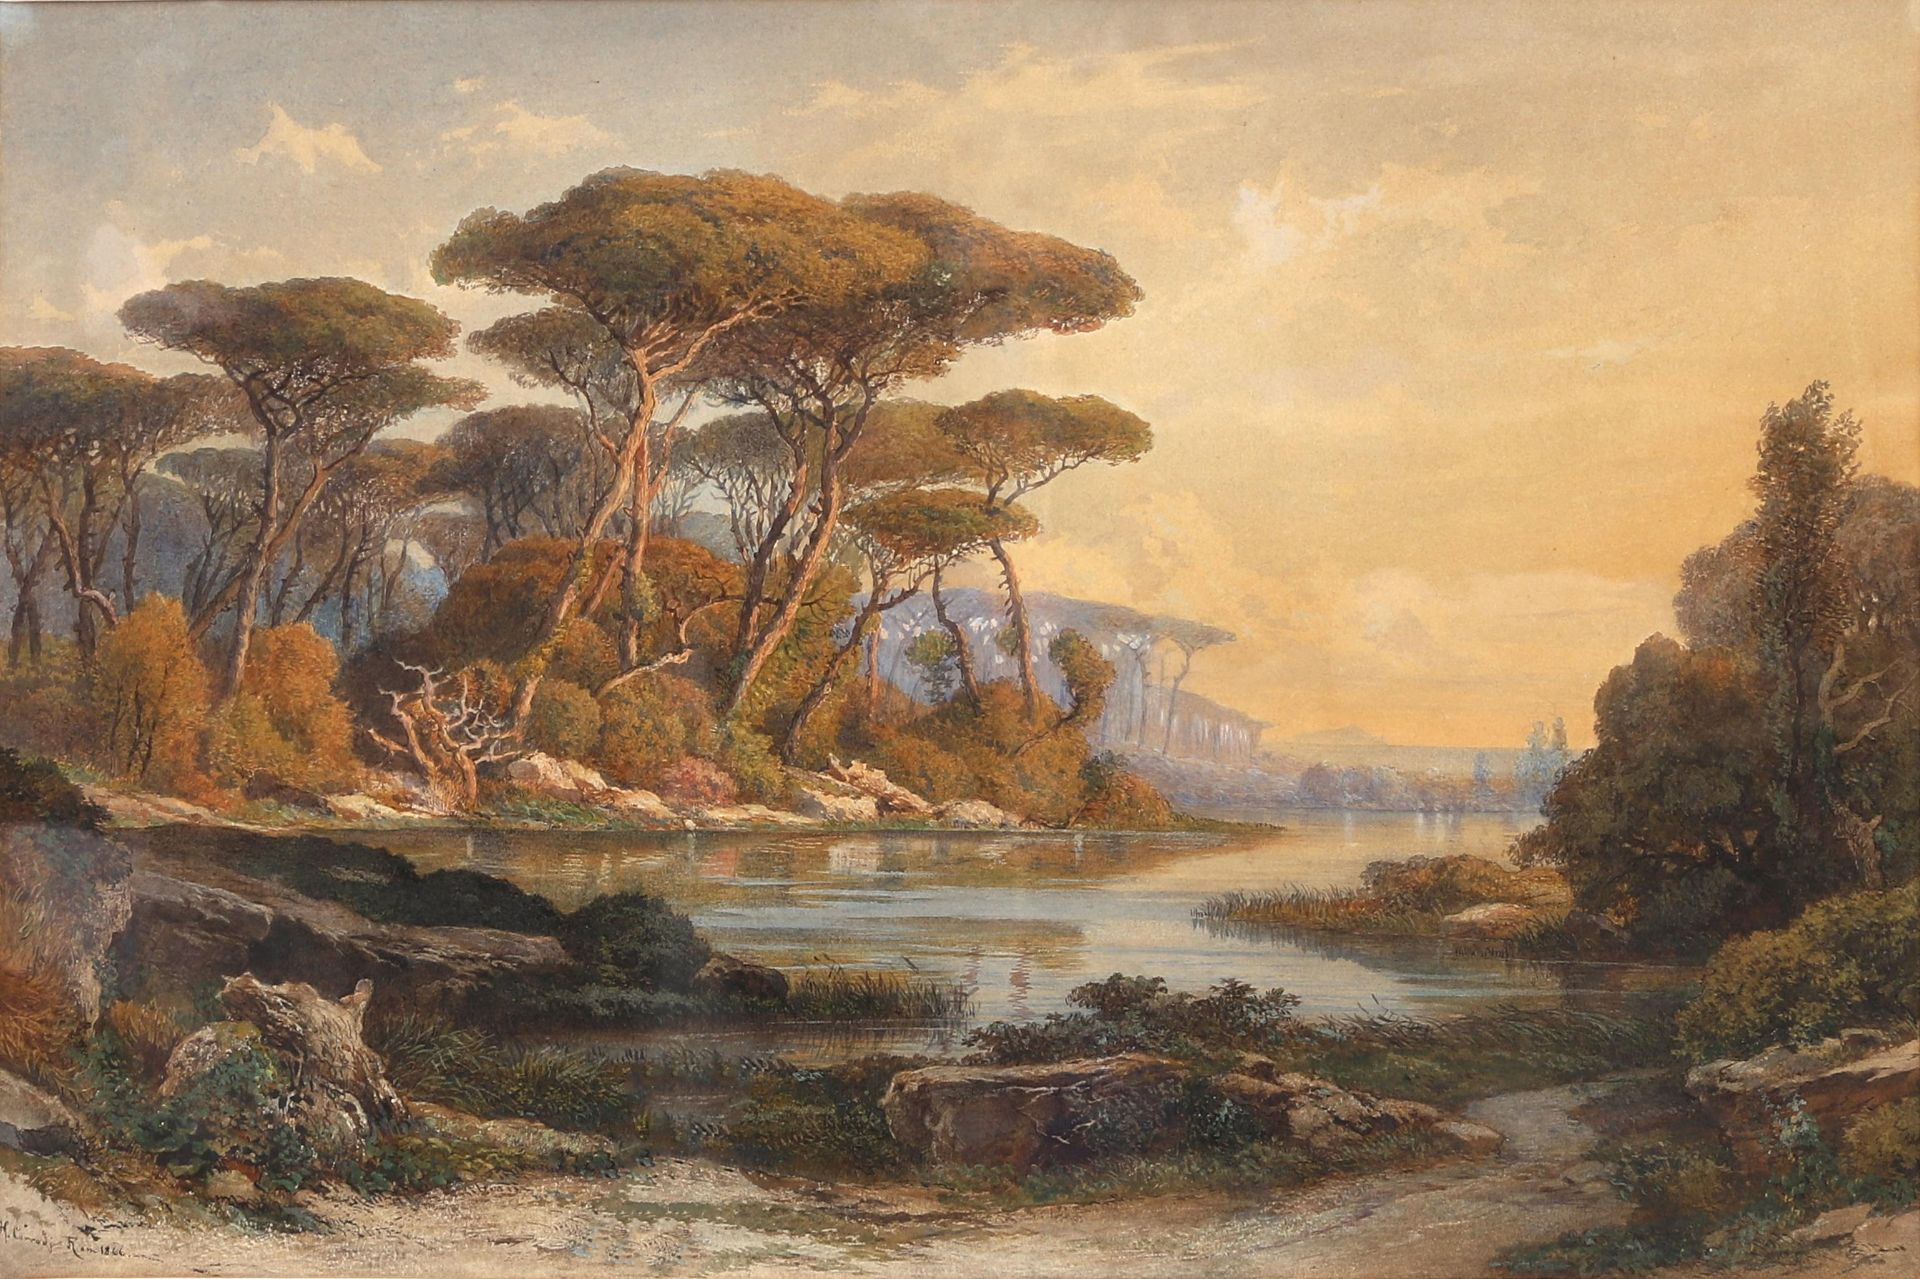 Hermann David Solomon Corrodi (1844-1905) 'Roman river view with pine trees', signed and dated lower